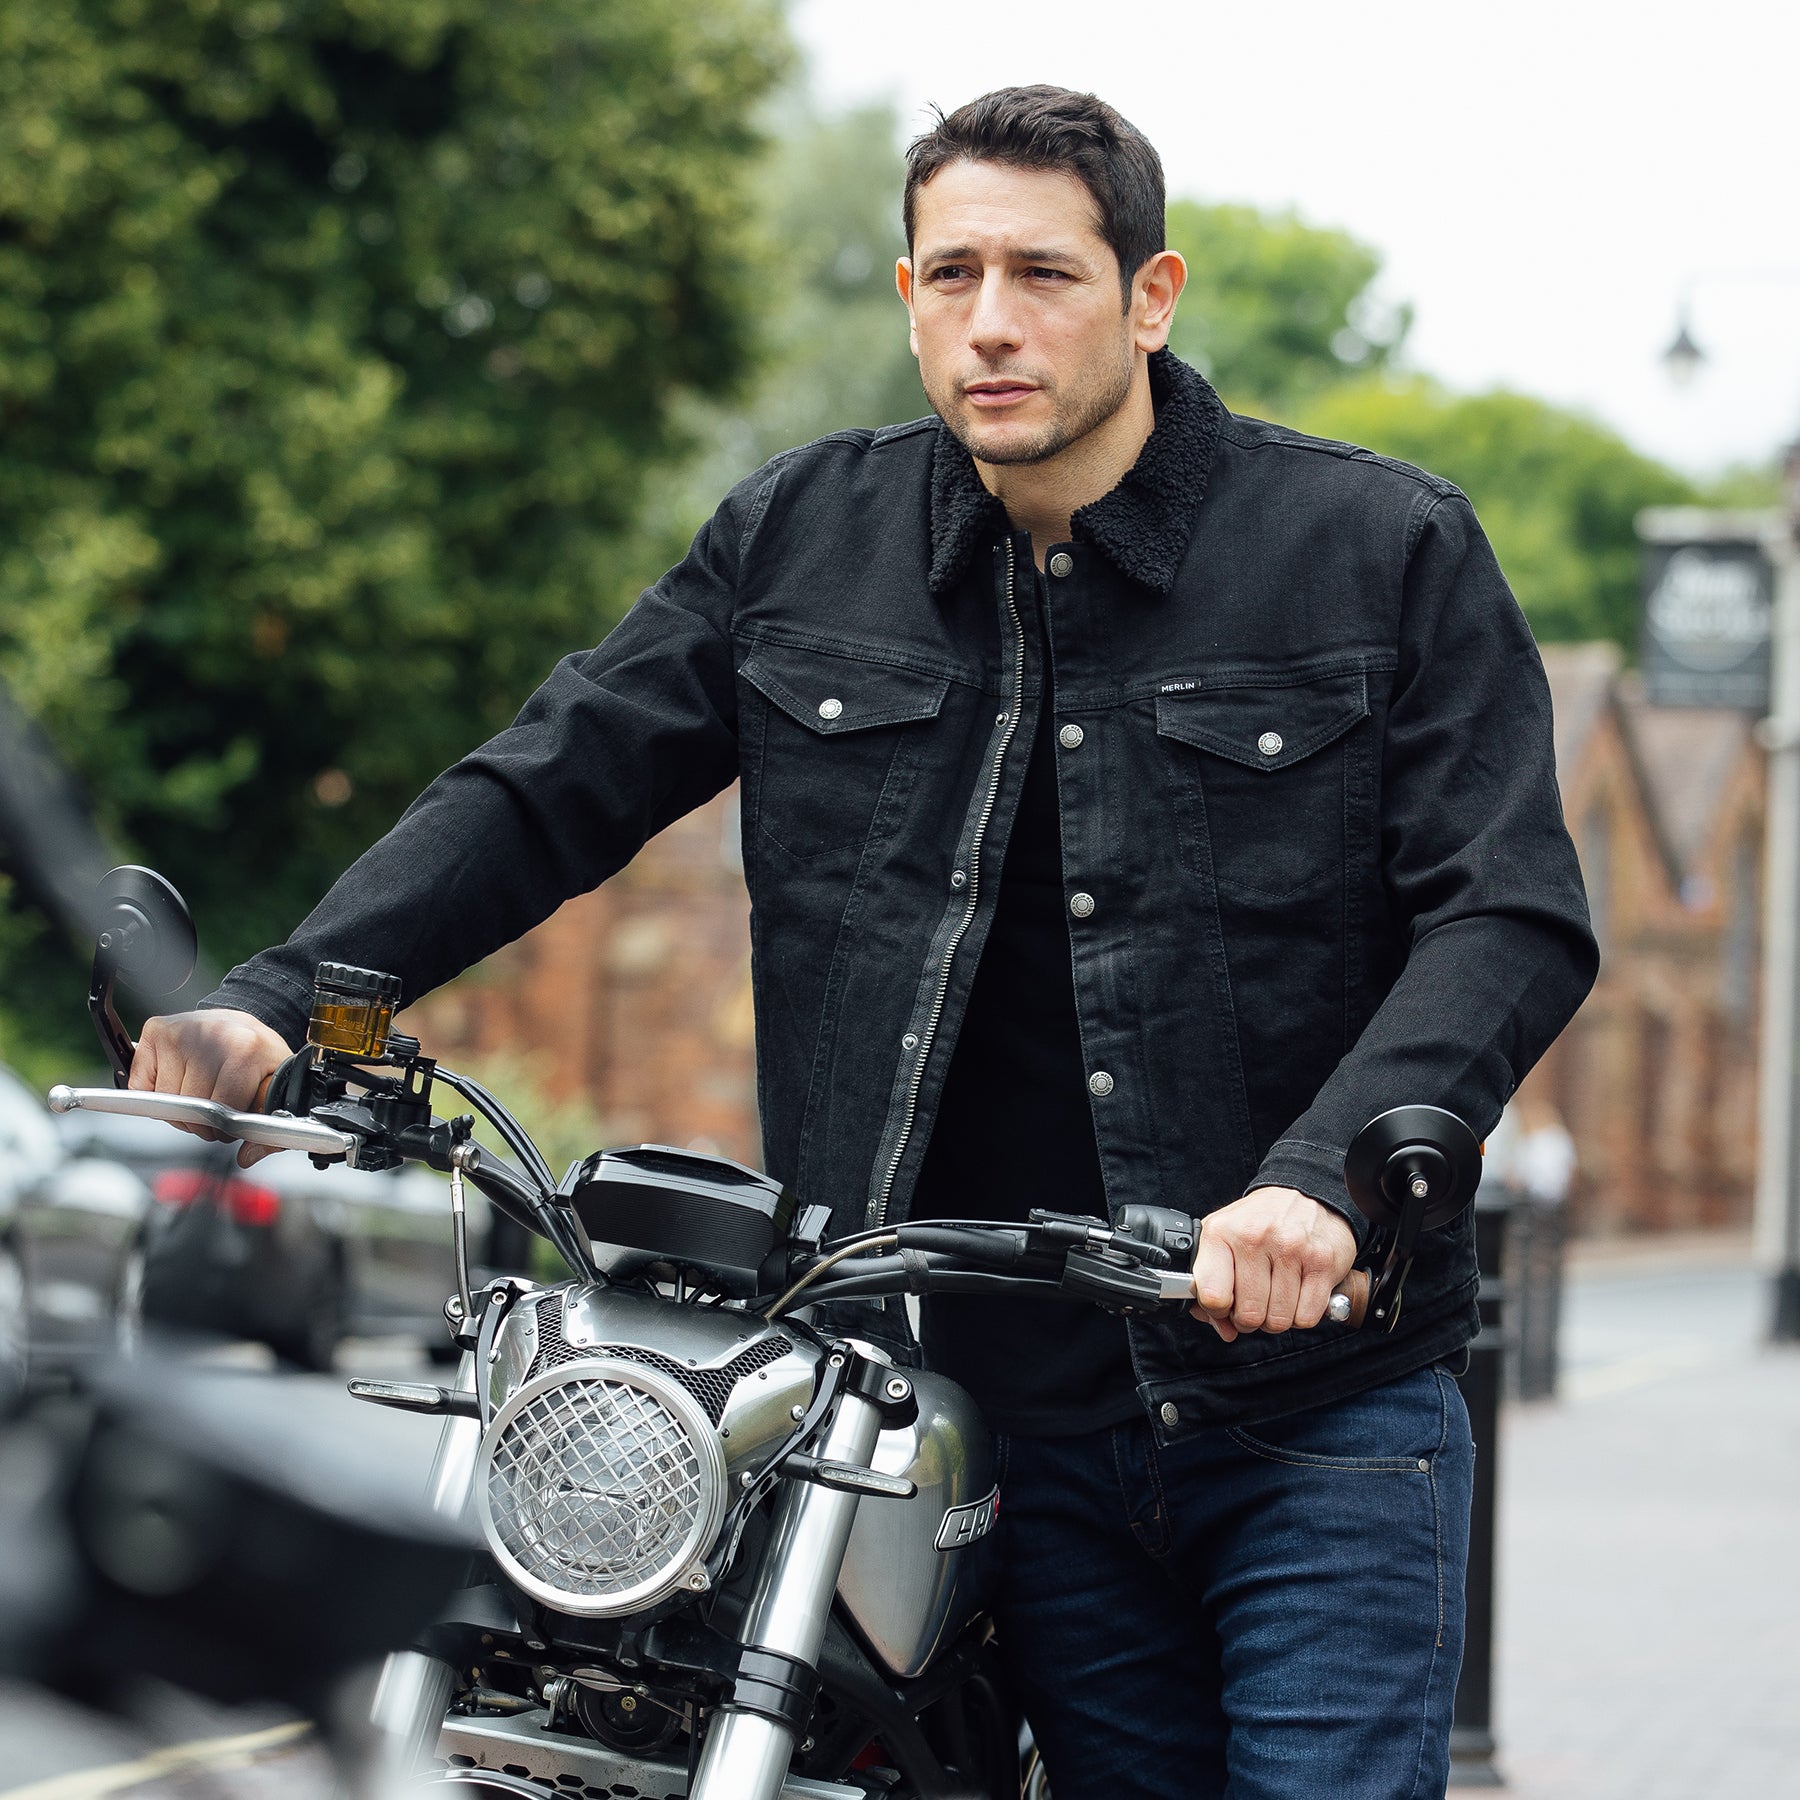 14 Coolest Motorcycle Jackets for Stylish Riders